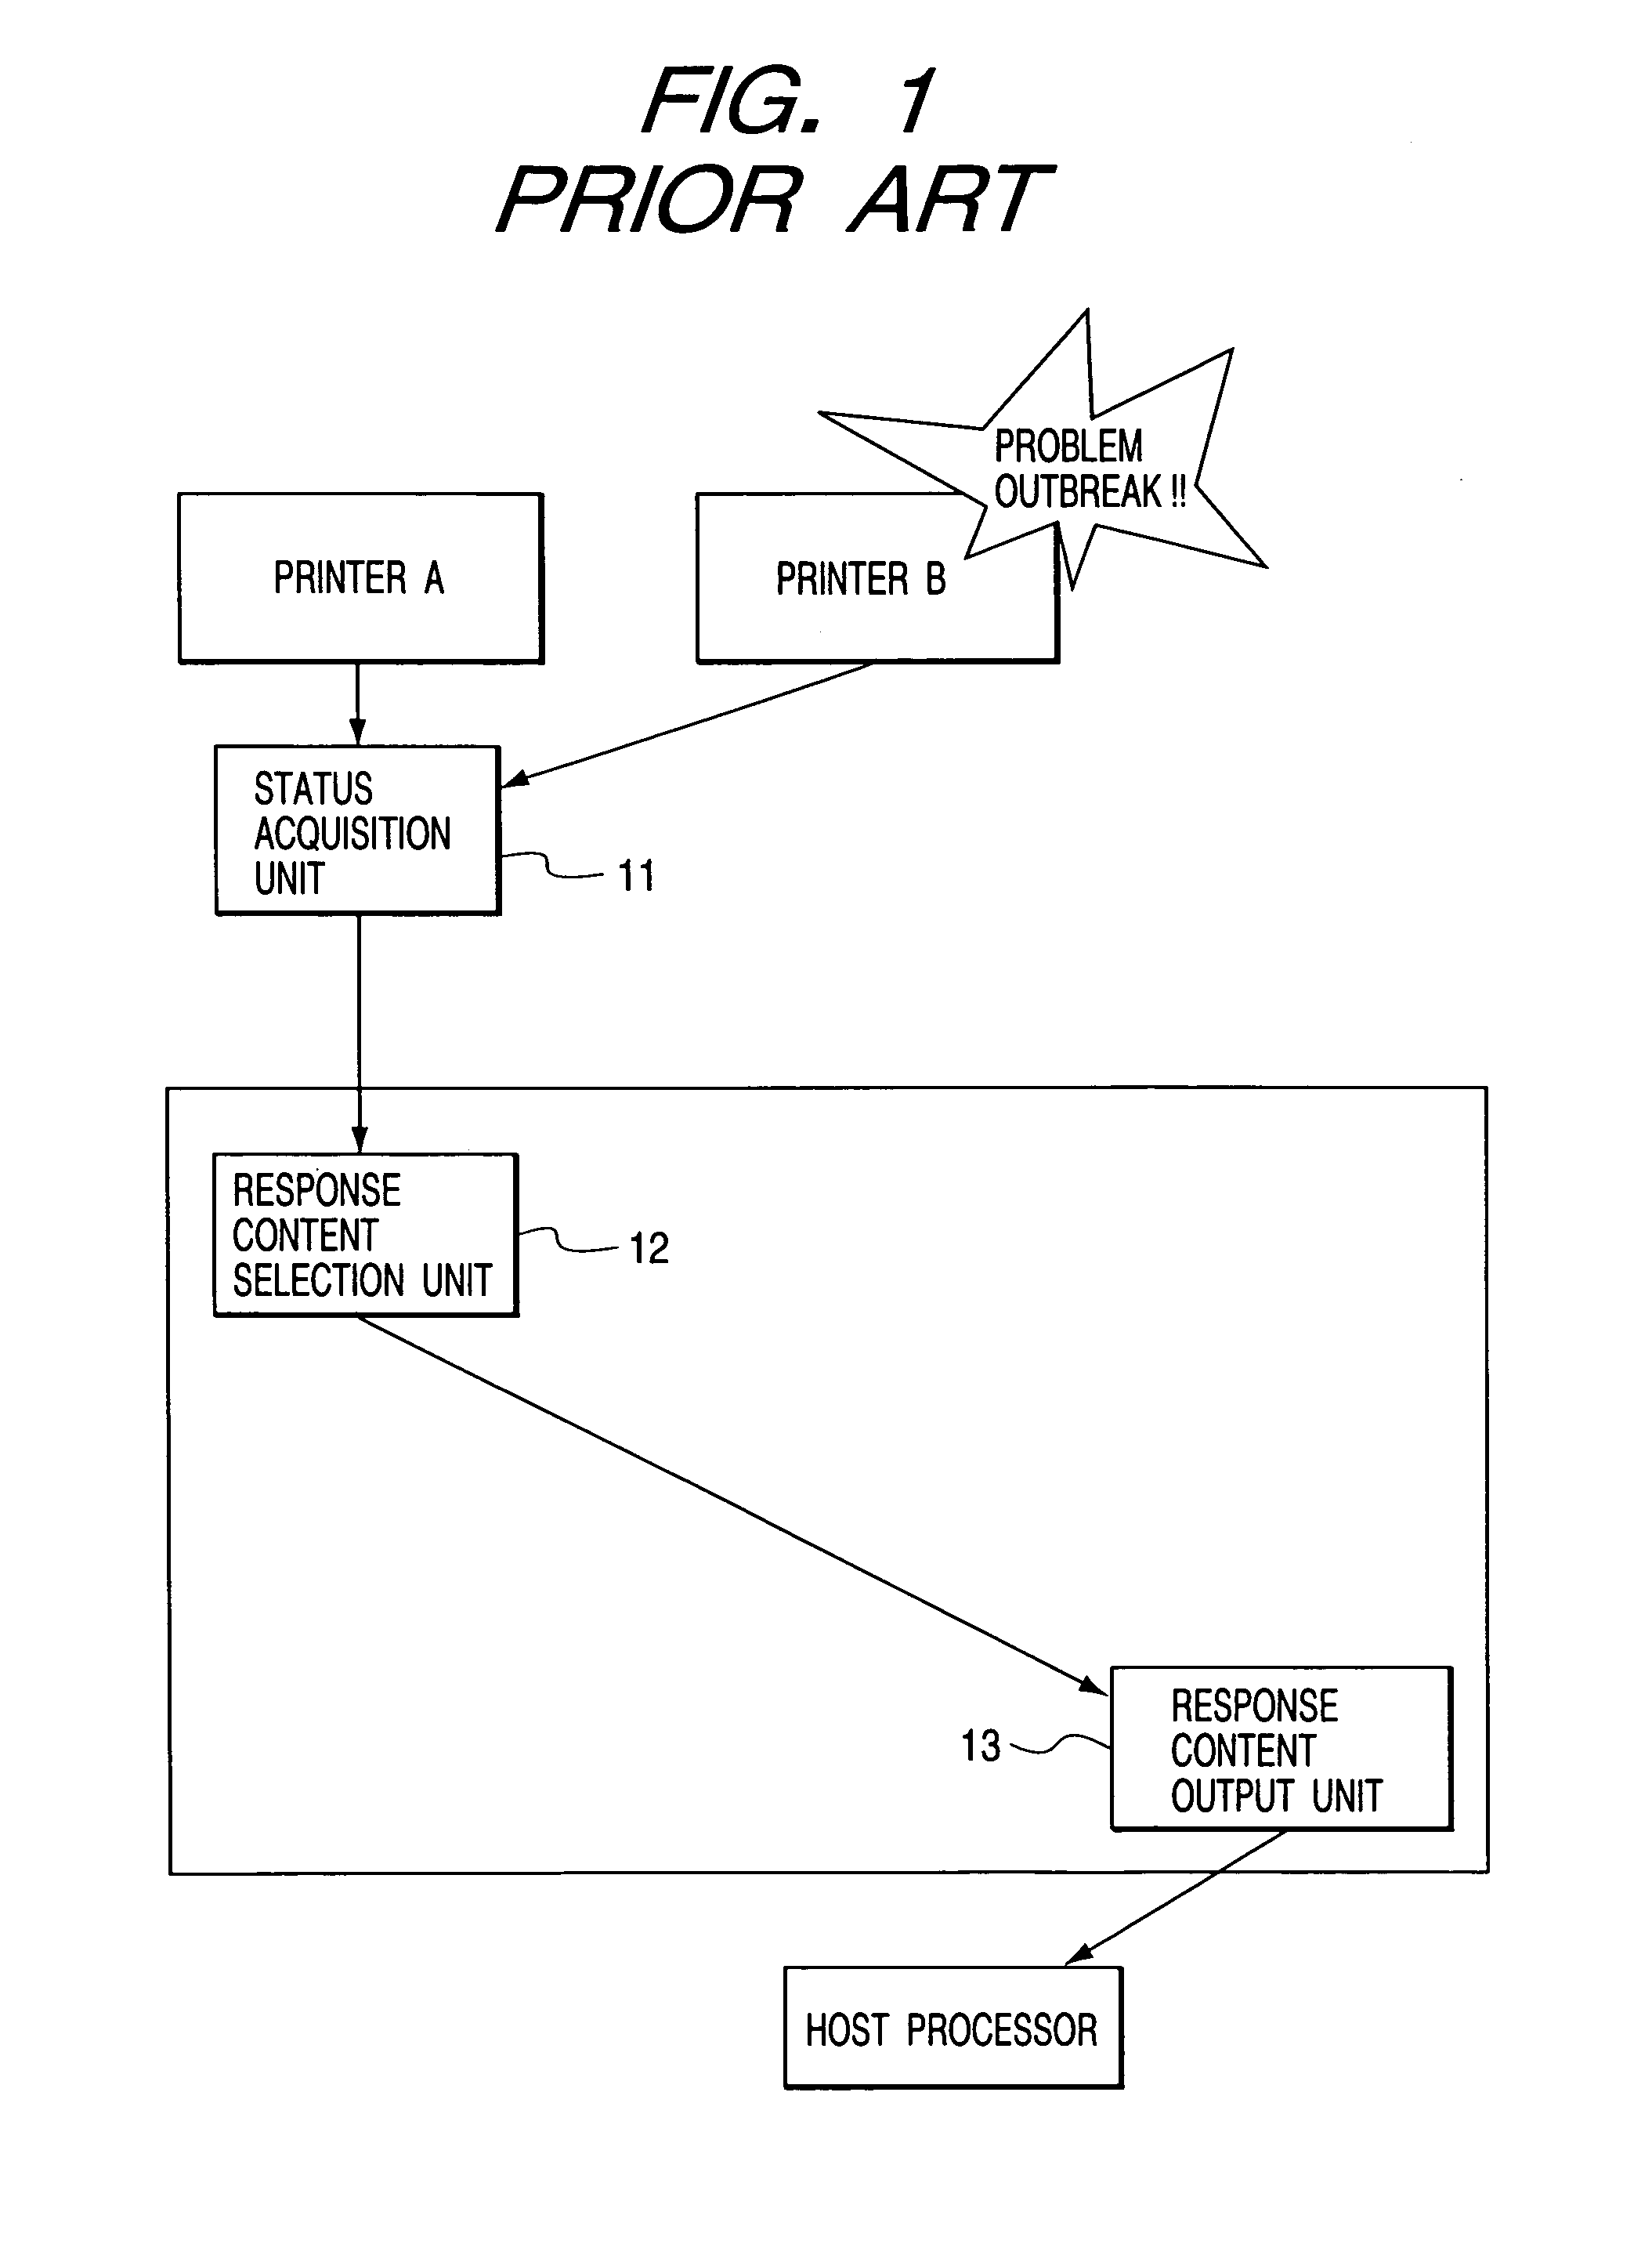 Response apparatus for sending a response in accordance with a state, and a method therefor